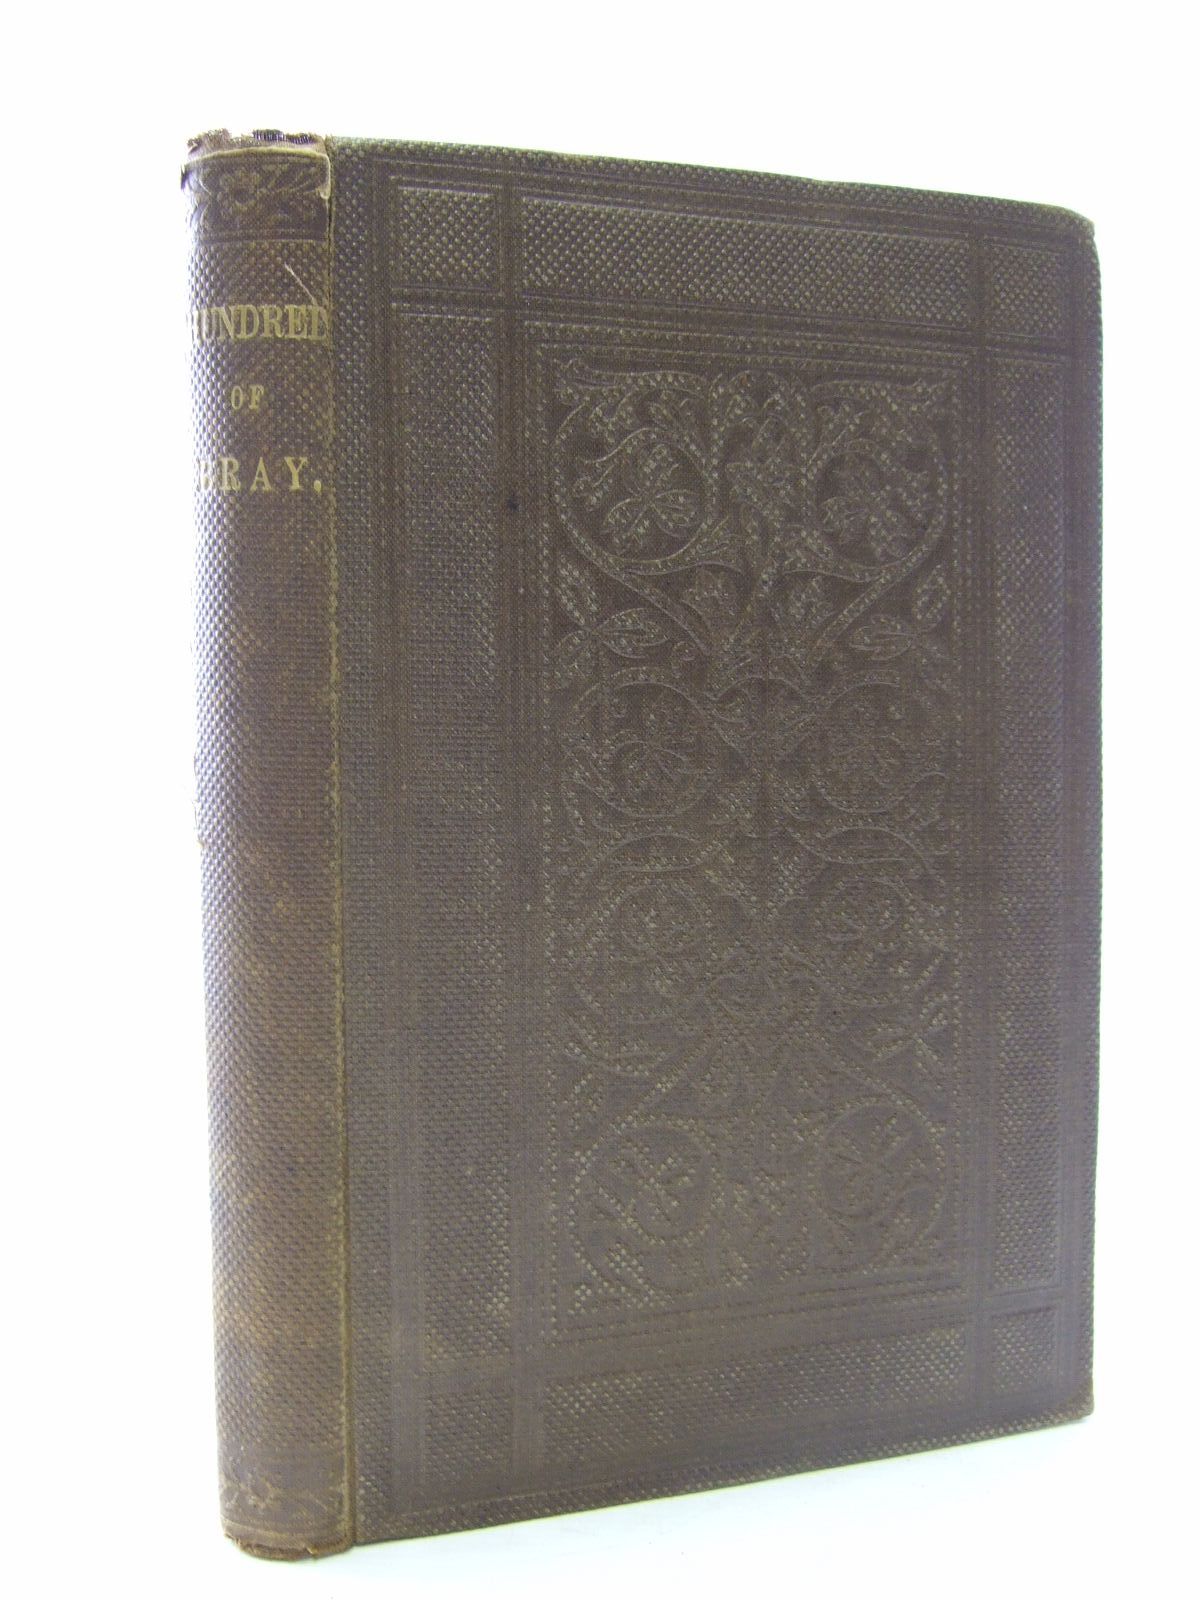 Photo of THE HISTORY AND ANTIQUITIES OF THE HUNDRED OF BRAY written by Kerry, Charles published by Savill And Edwards (STOCK CODE: 2106968)  for sale by Stella & Rose's Books